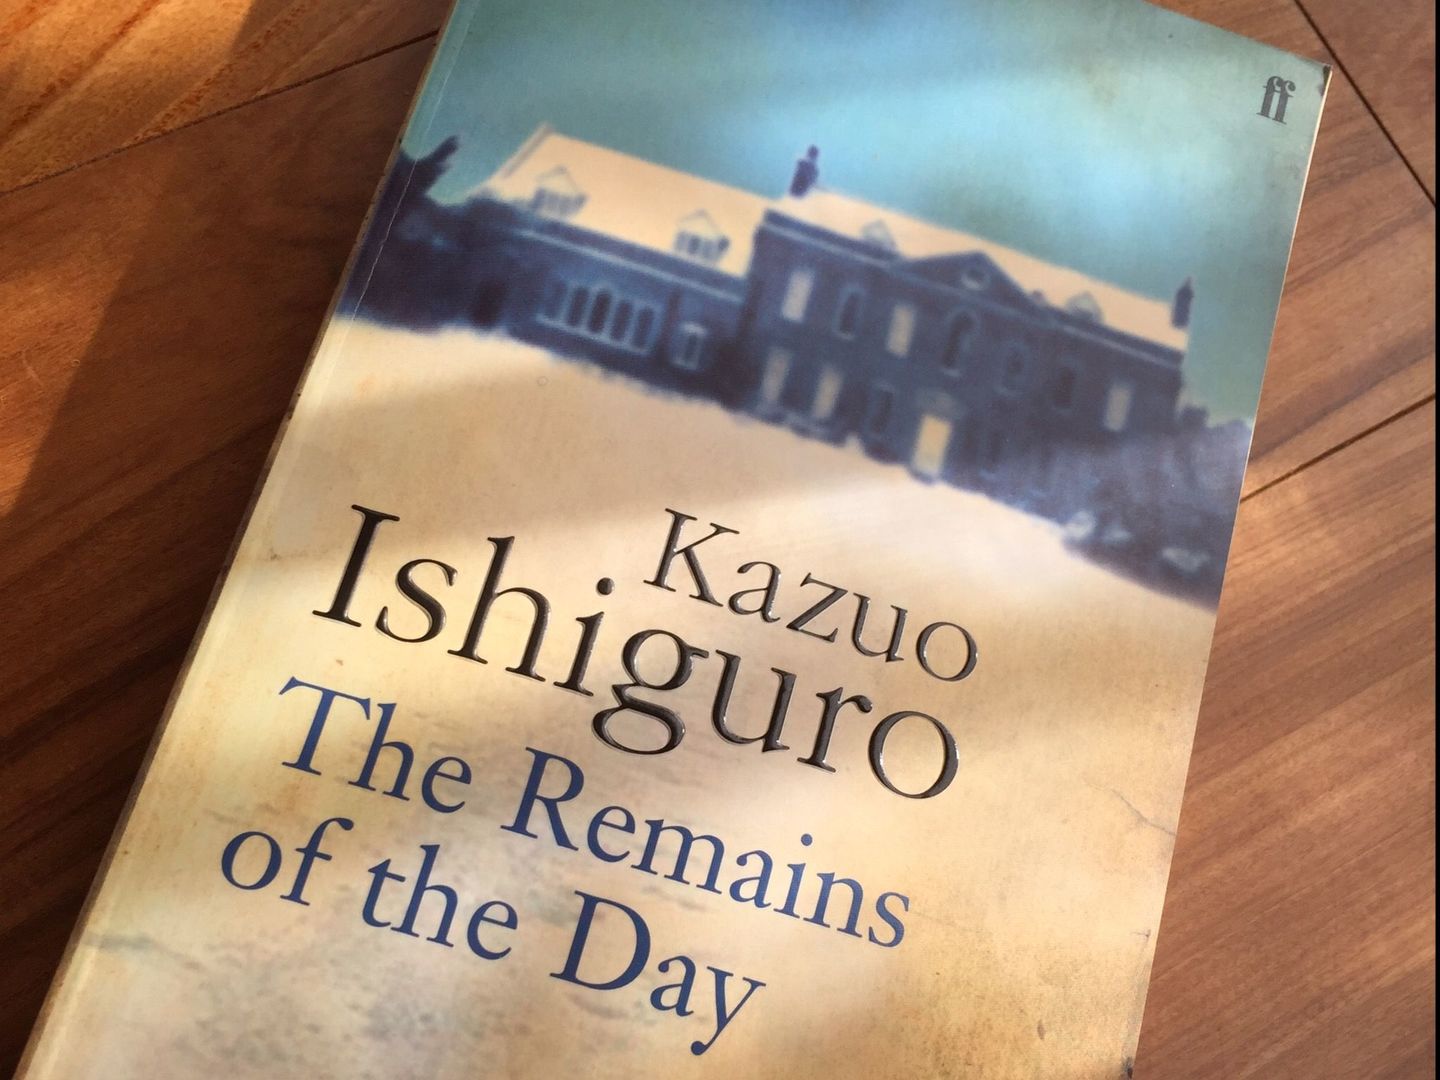 Kazuo Ishiguro The Remains of the Day表紙